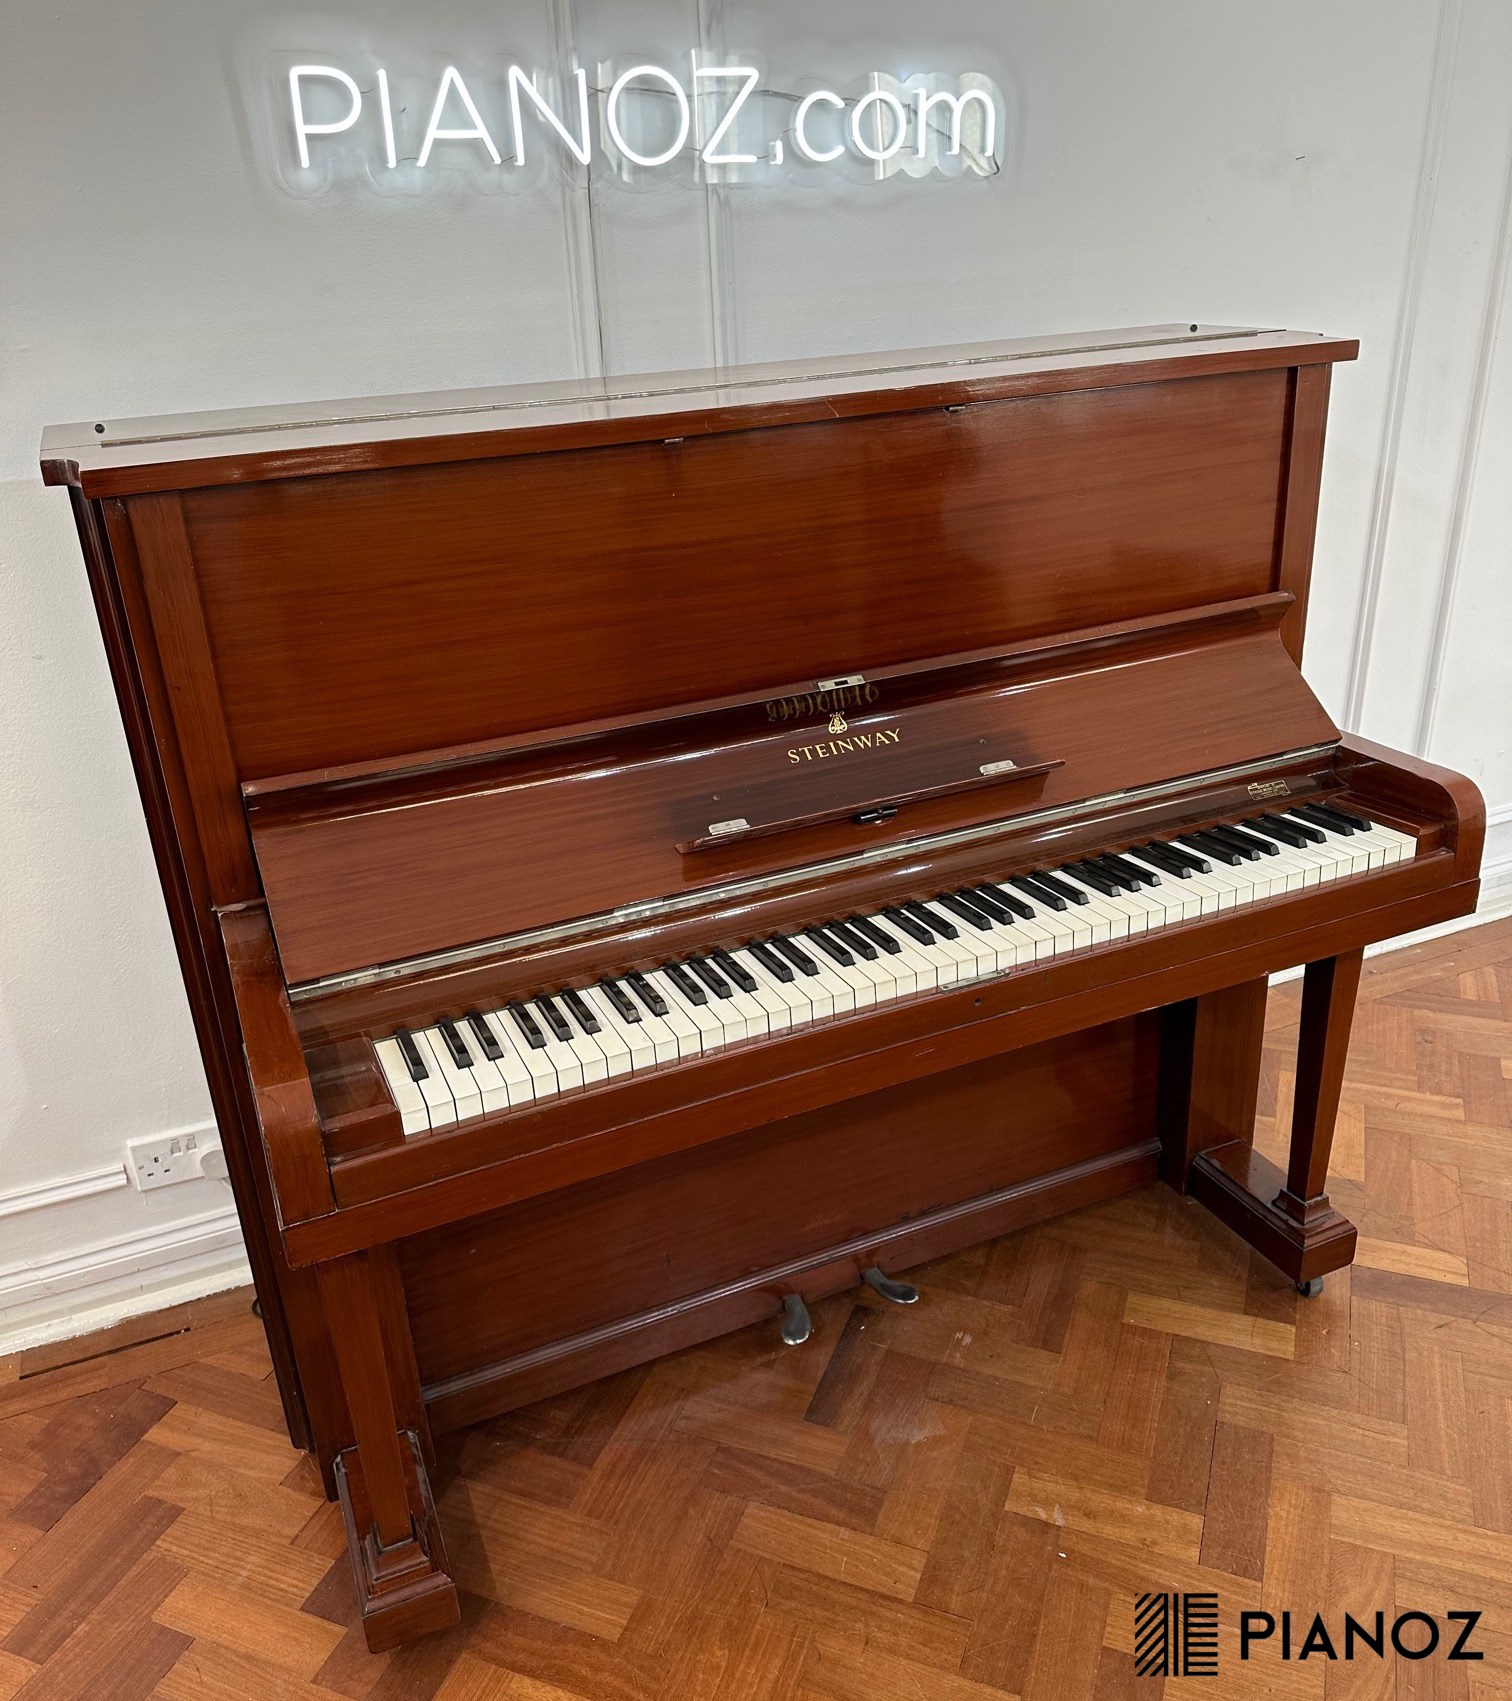 Steinway & Sons Restored Upright Piano piano for sale in UK